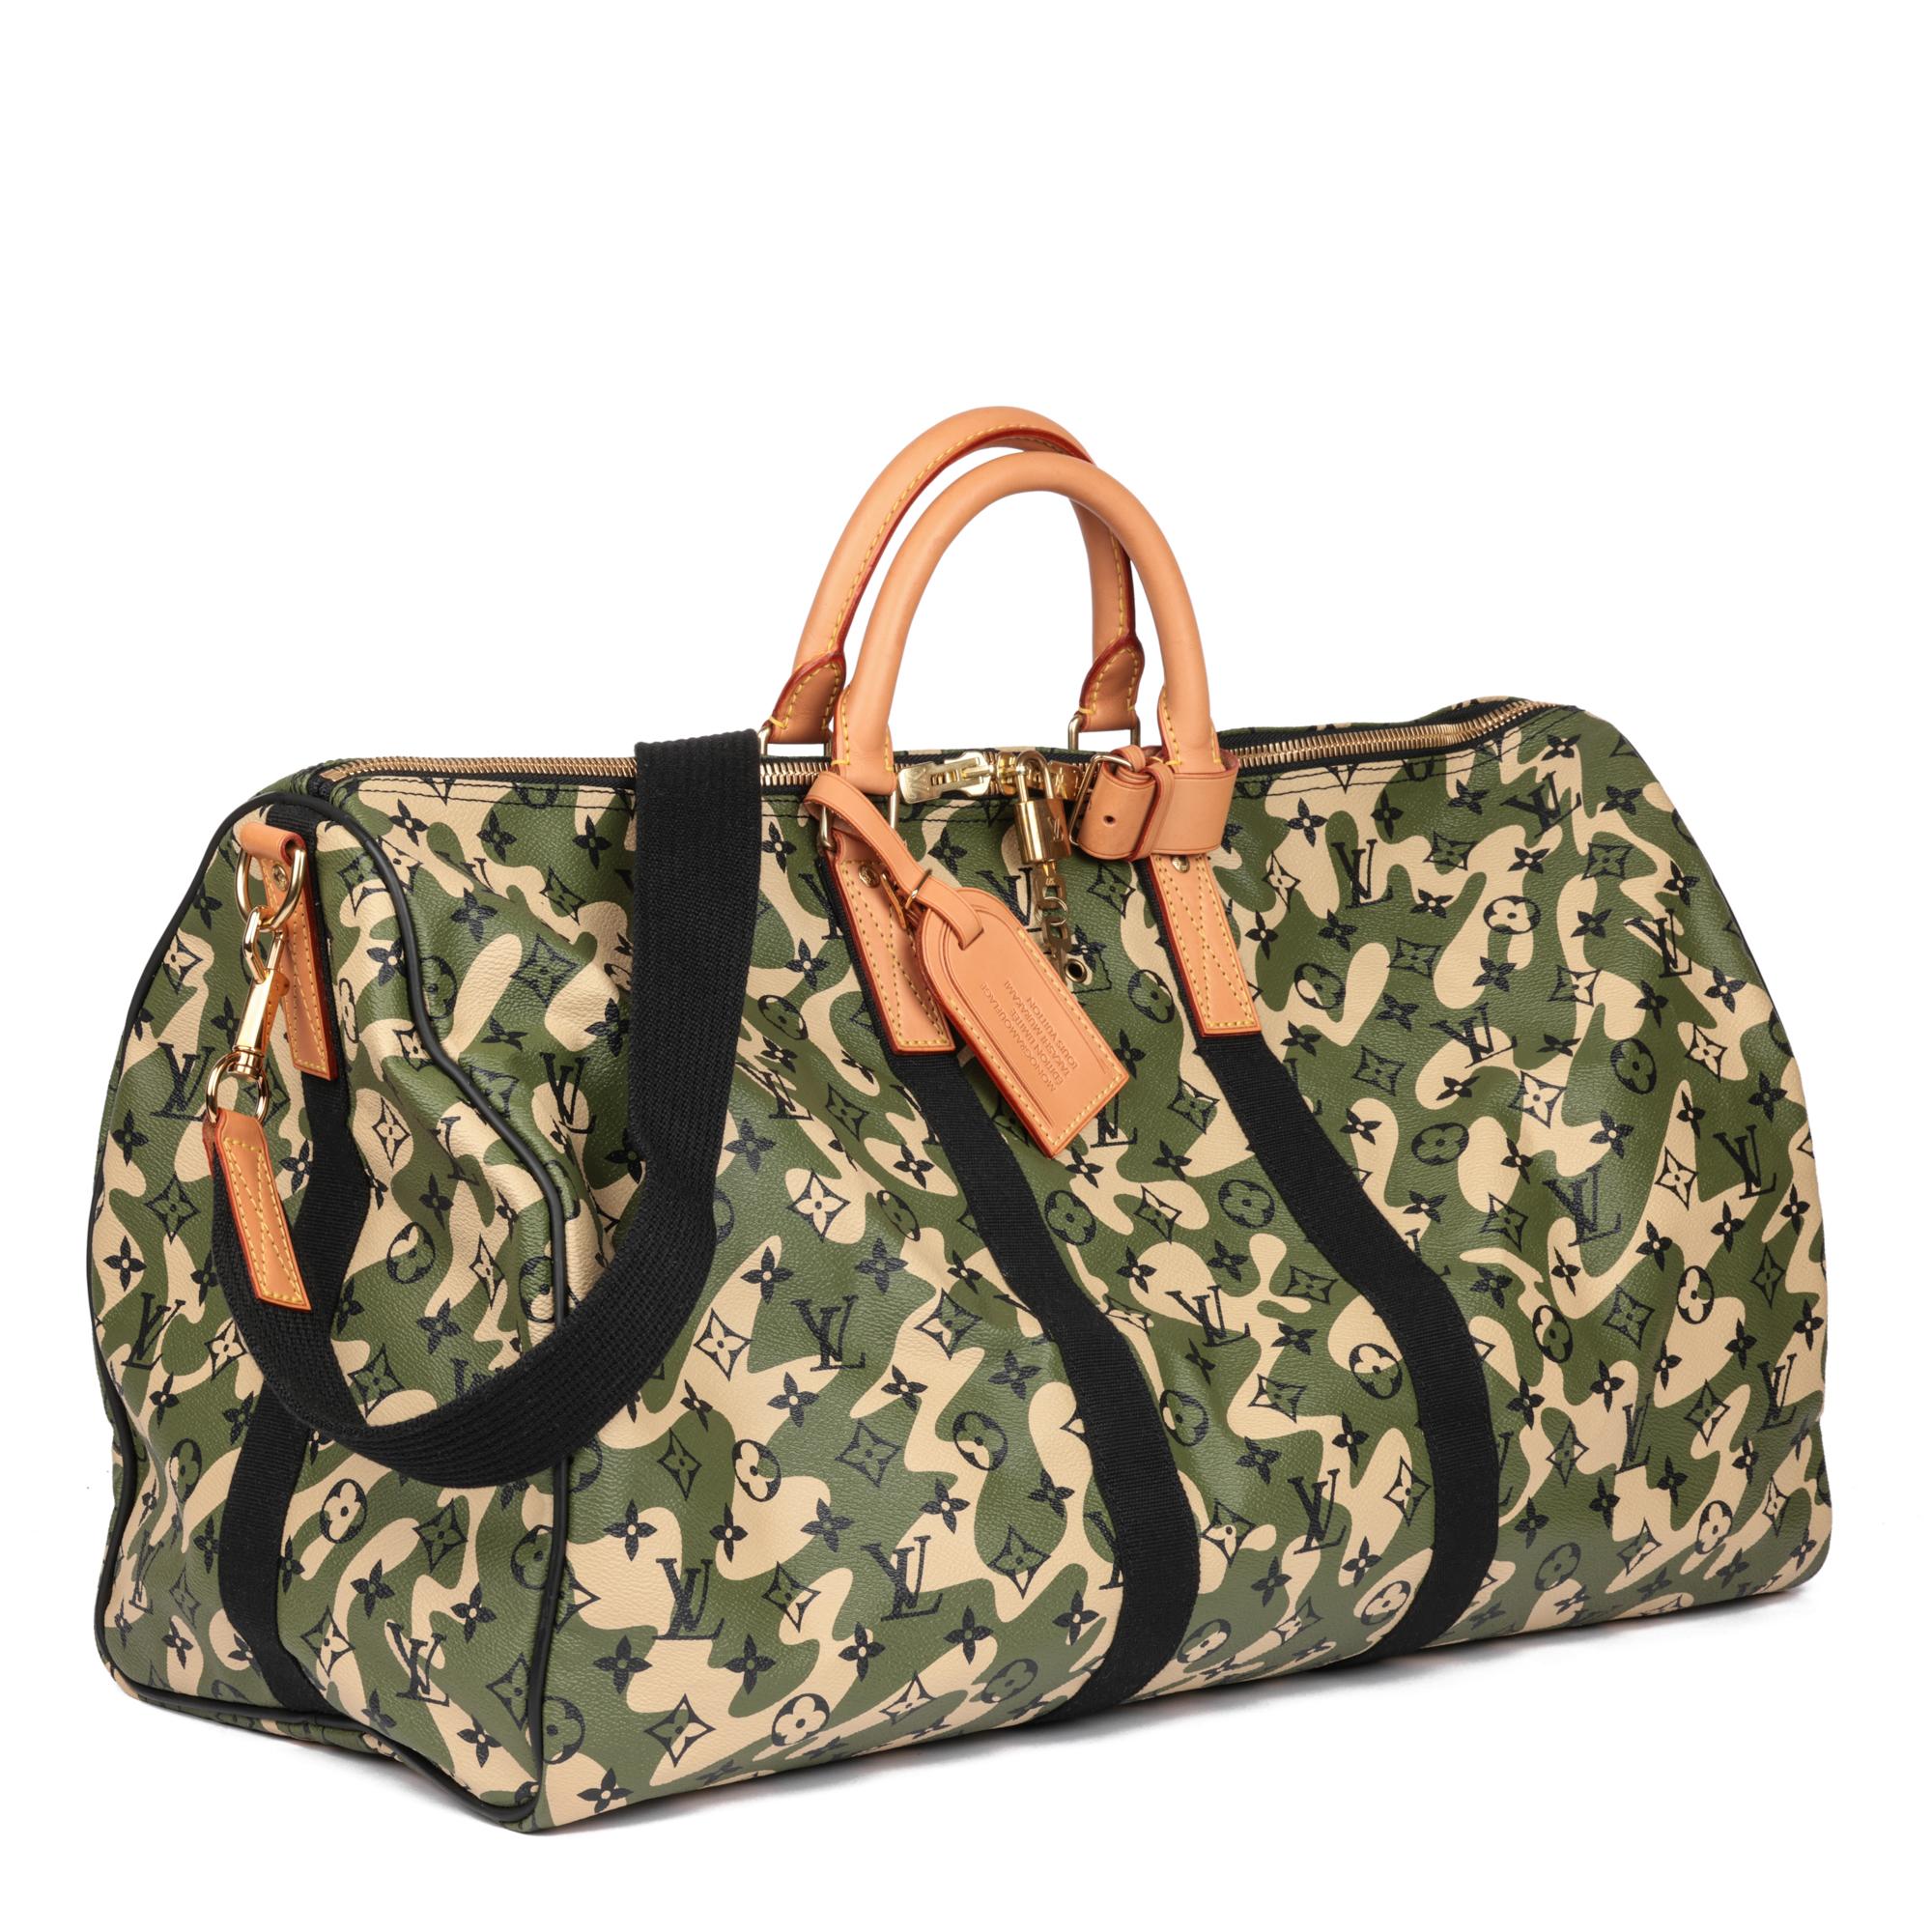 LOUIS VUITTON
x Takashi Murakami Green Monogramouflage Monogram Coated Canvas & Vachetta Leather Keepall 55 Bandoulière

Xupes Reference: HB5103
Serial Number: MB2058
Age (Circa): 2008
Accompanied By: Louis Vuitton Dust Bag, Padlock, Keys, Shoulder